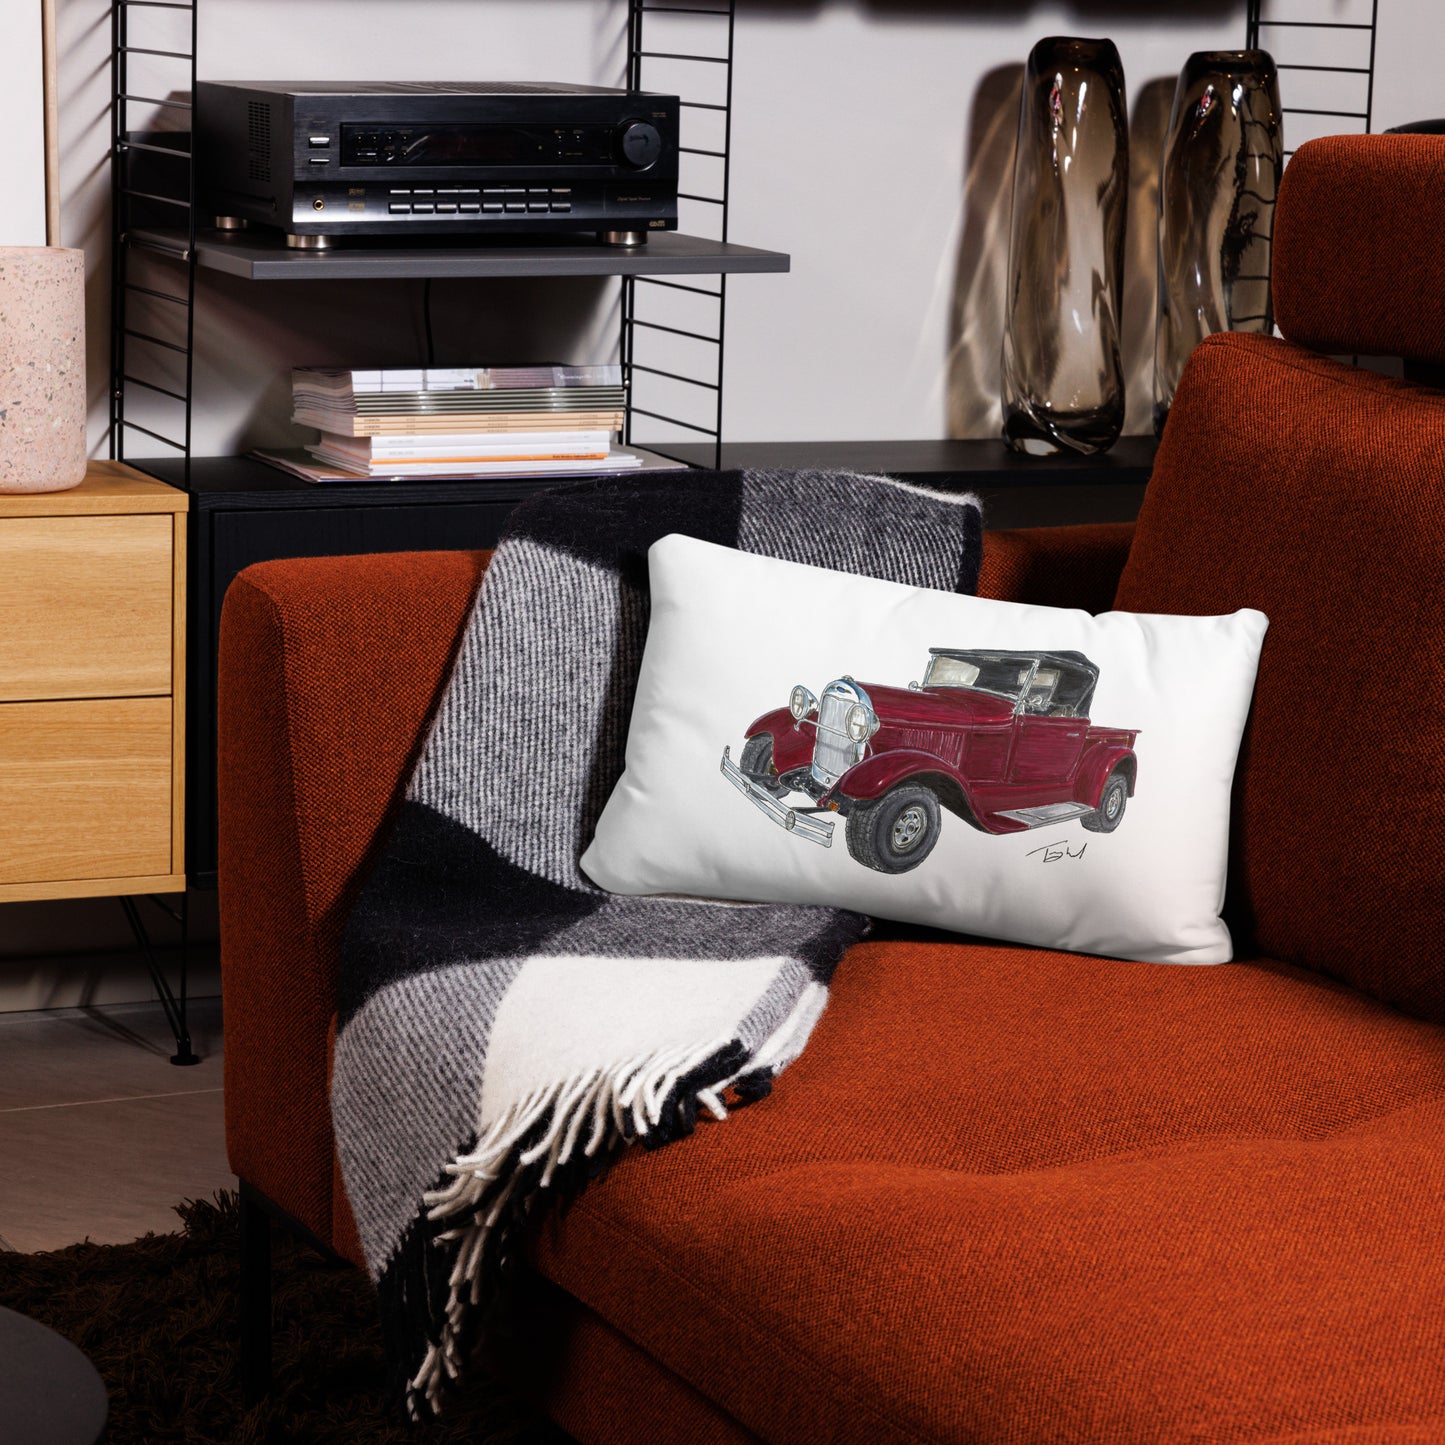 1929 Ford Model A Roadster Pickup Basic Pillow